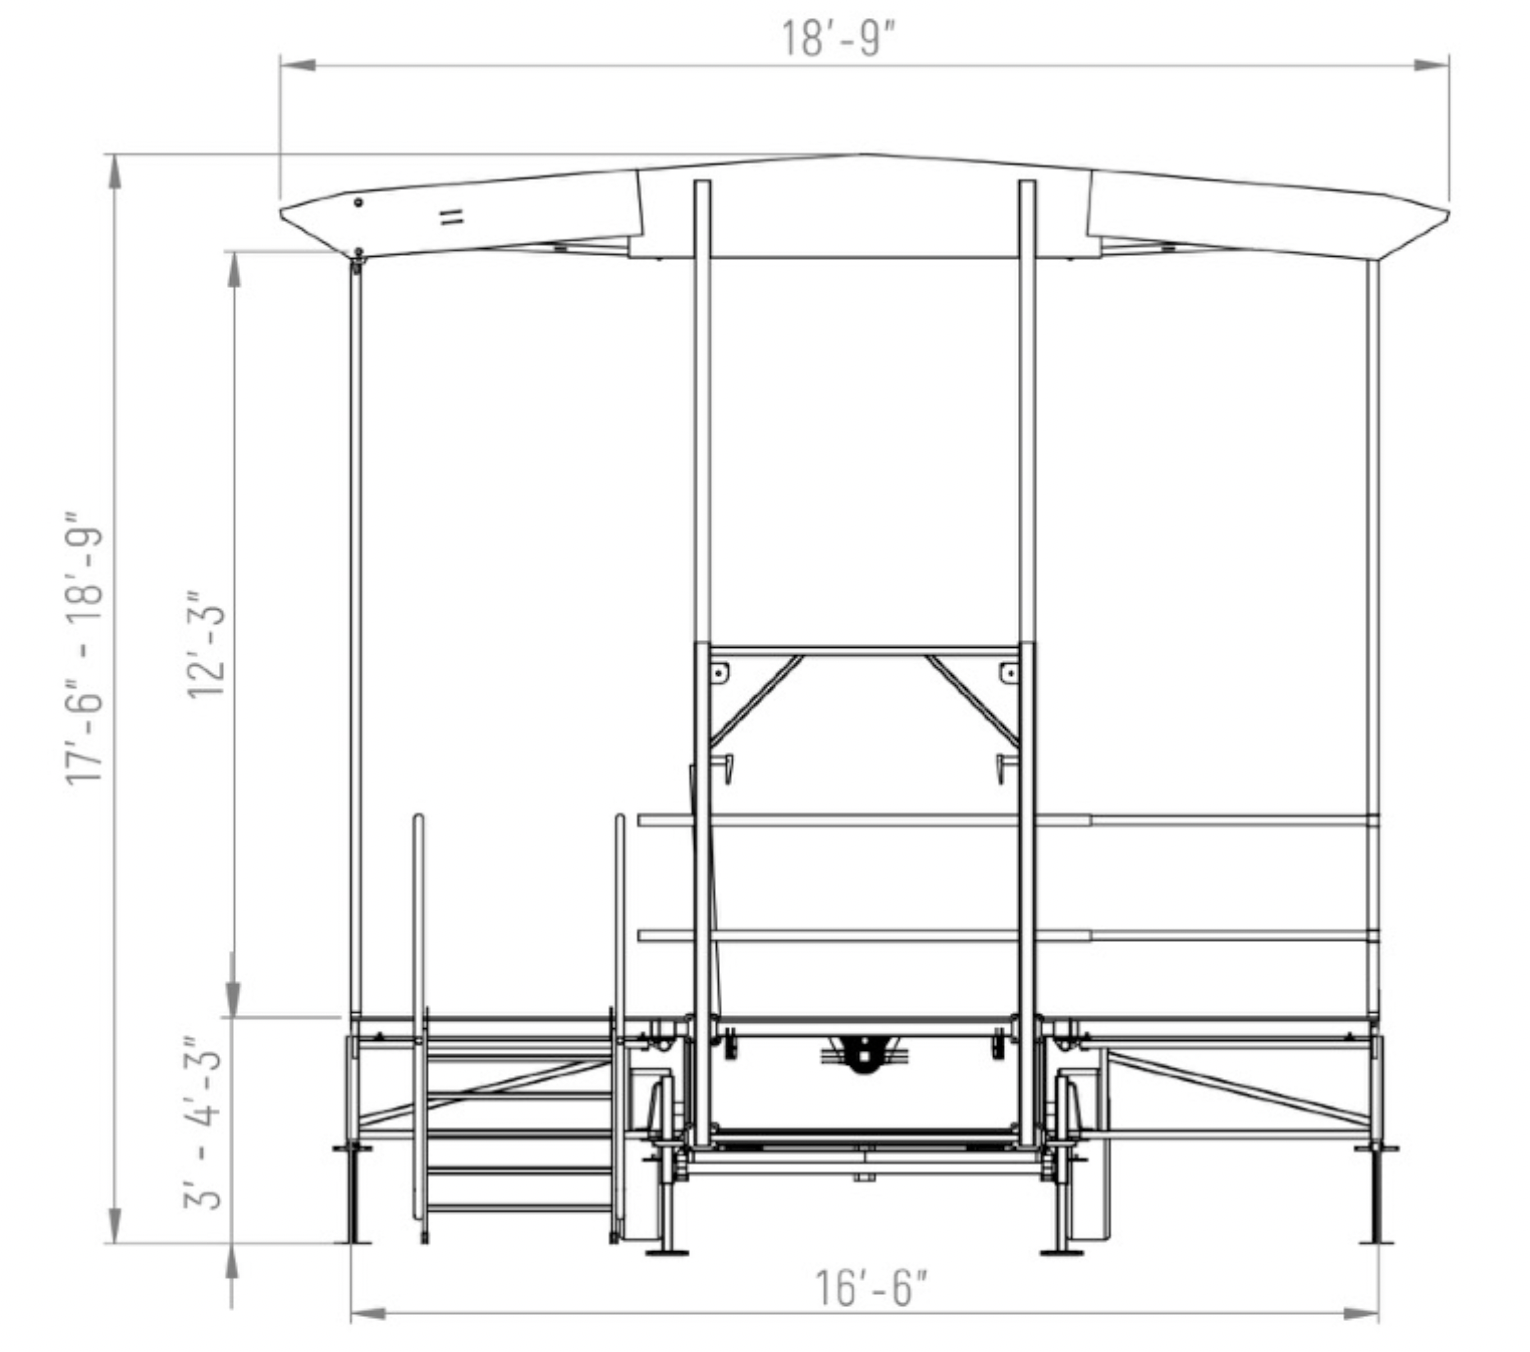 Mobile stage diagram dimensions